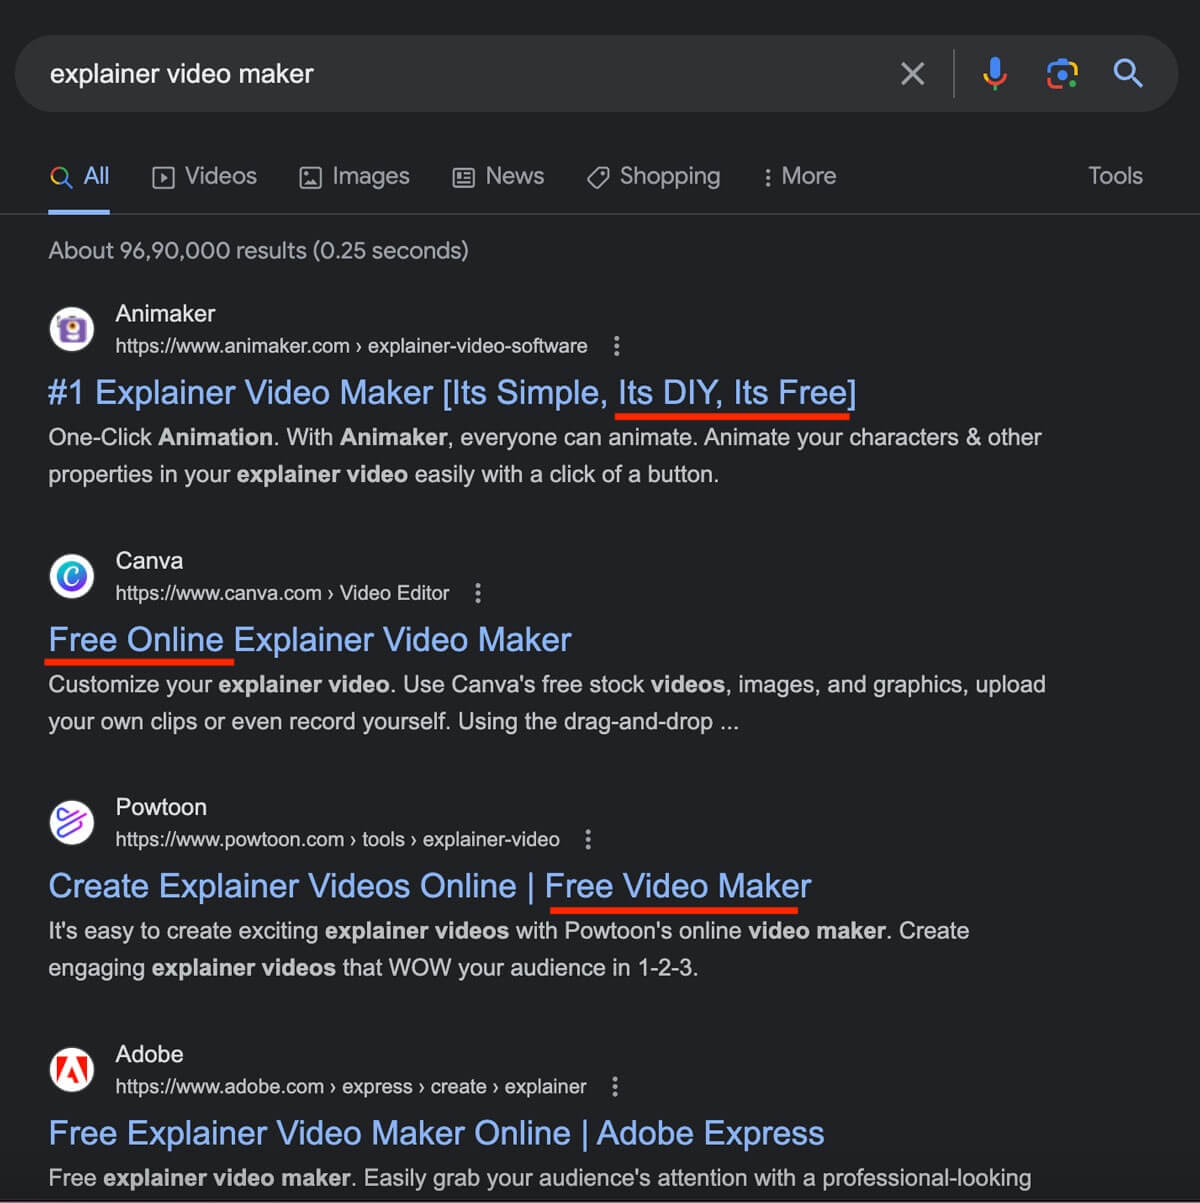 Screenshot showing search results of explainer video maker claiming to be free.